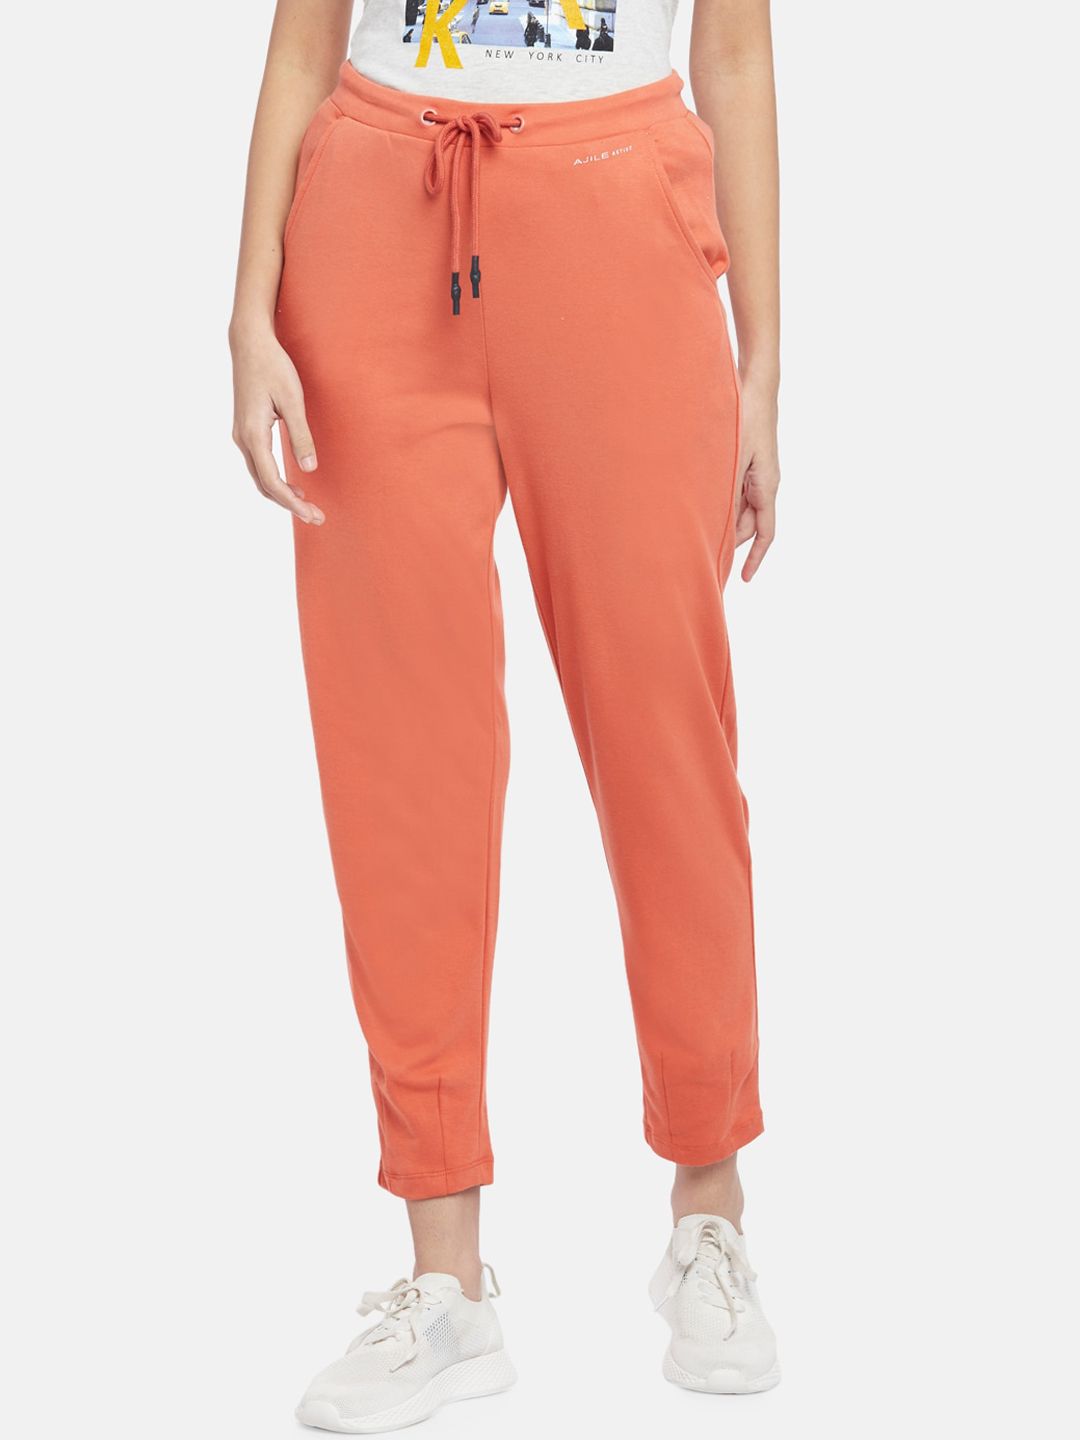 Ajile by Pantaloons Women Rust Orange Coloured Track Pants Price in India